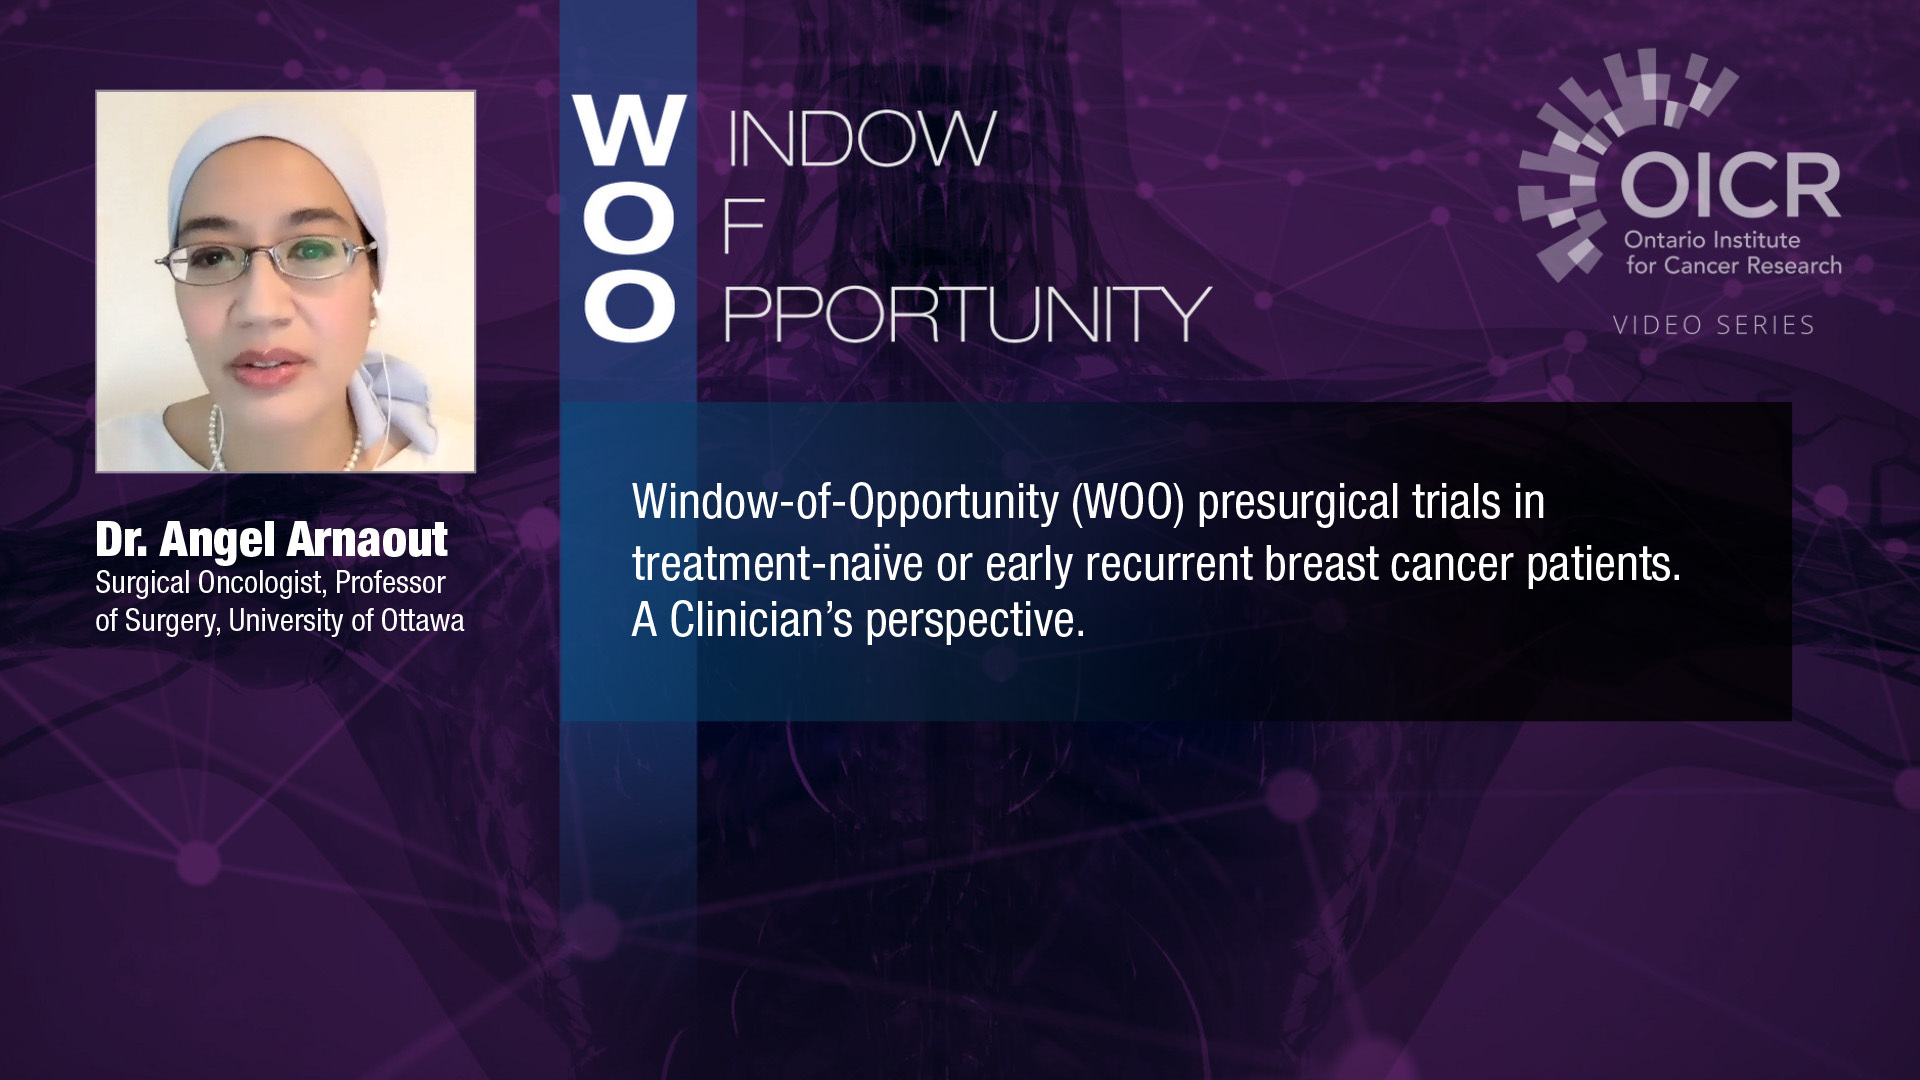 WOO SERIES - WOO presurgical trials -  a Clinician’s perspective